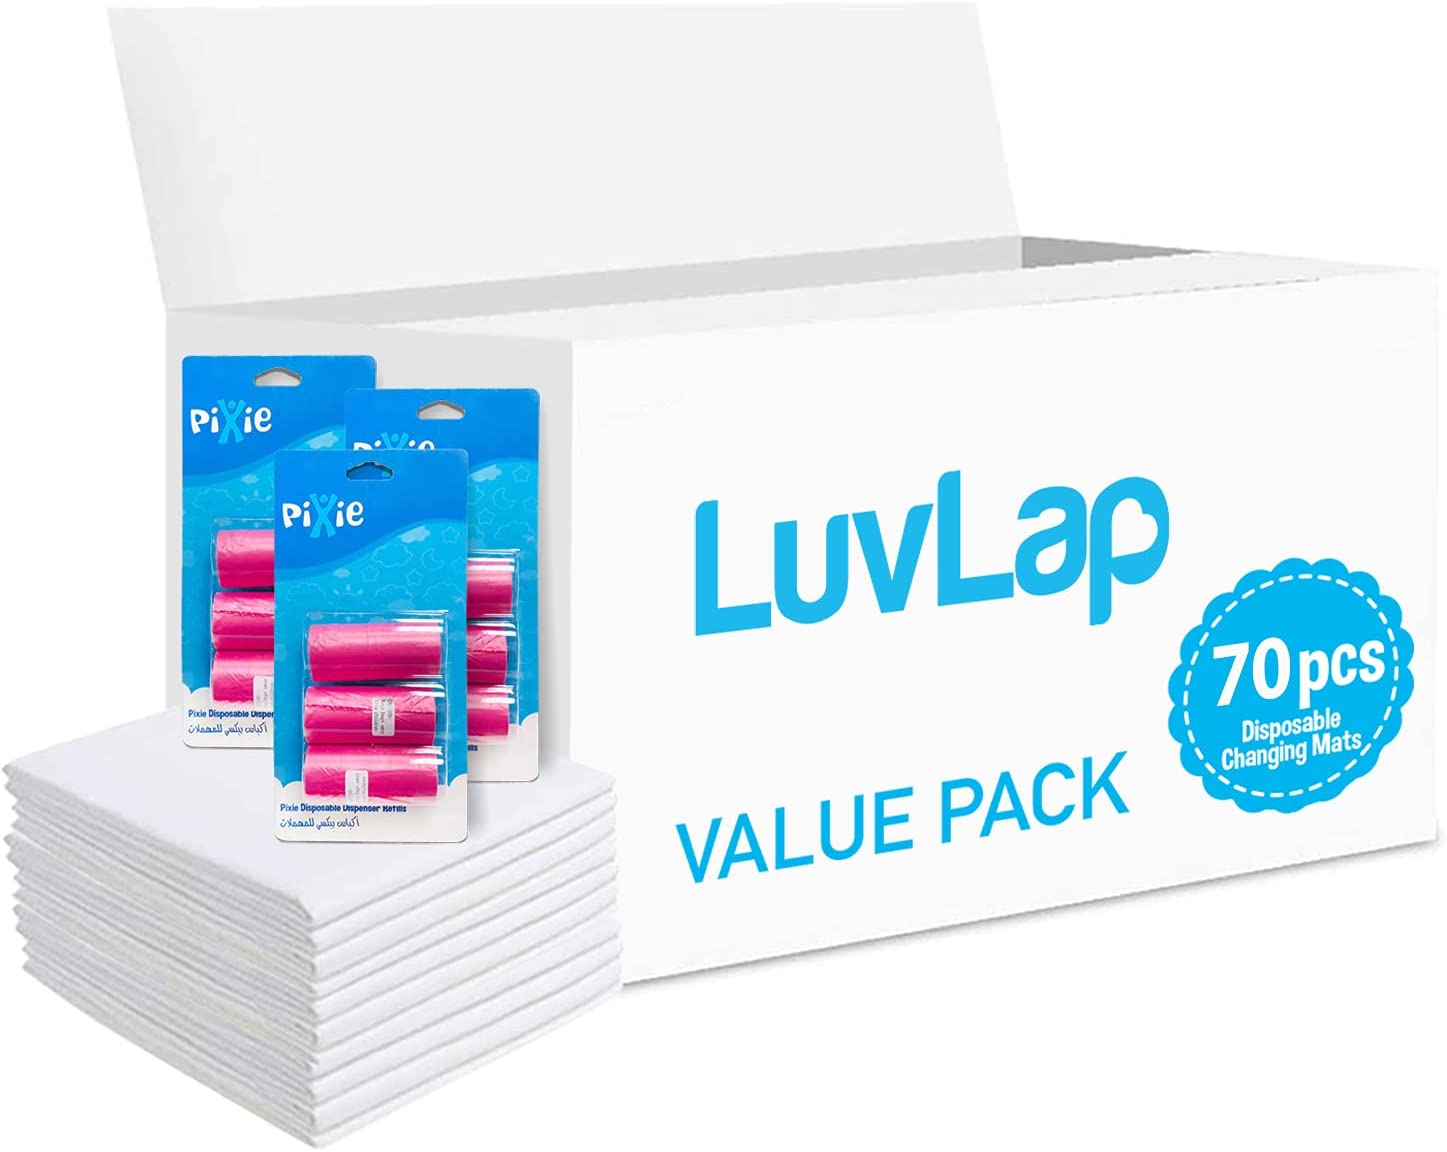 LUVLAP Changing Mat 70 + Pack of 3 Refill PINK (9 Rolls) 180 Nappy Bags